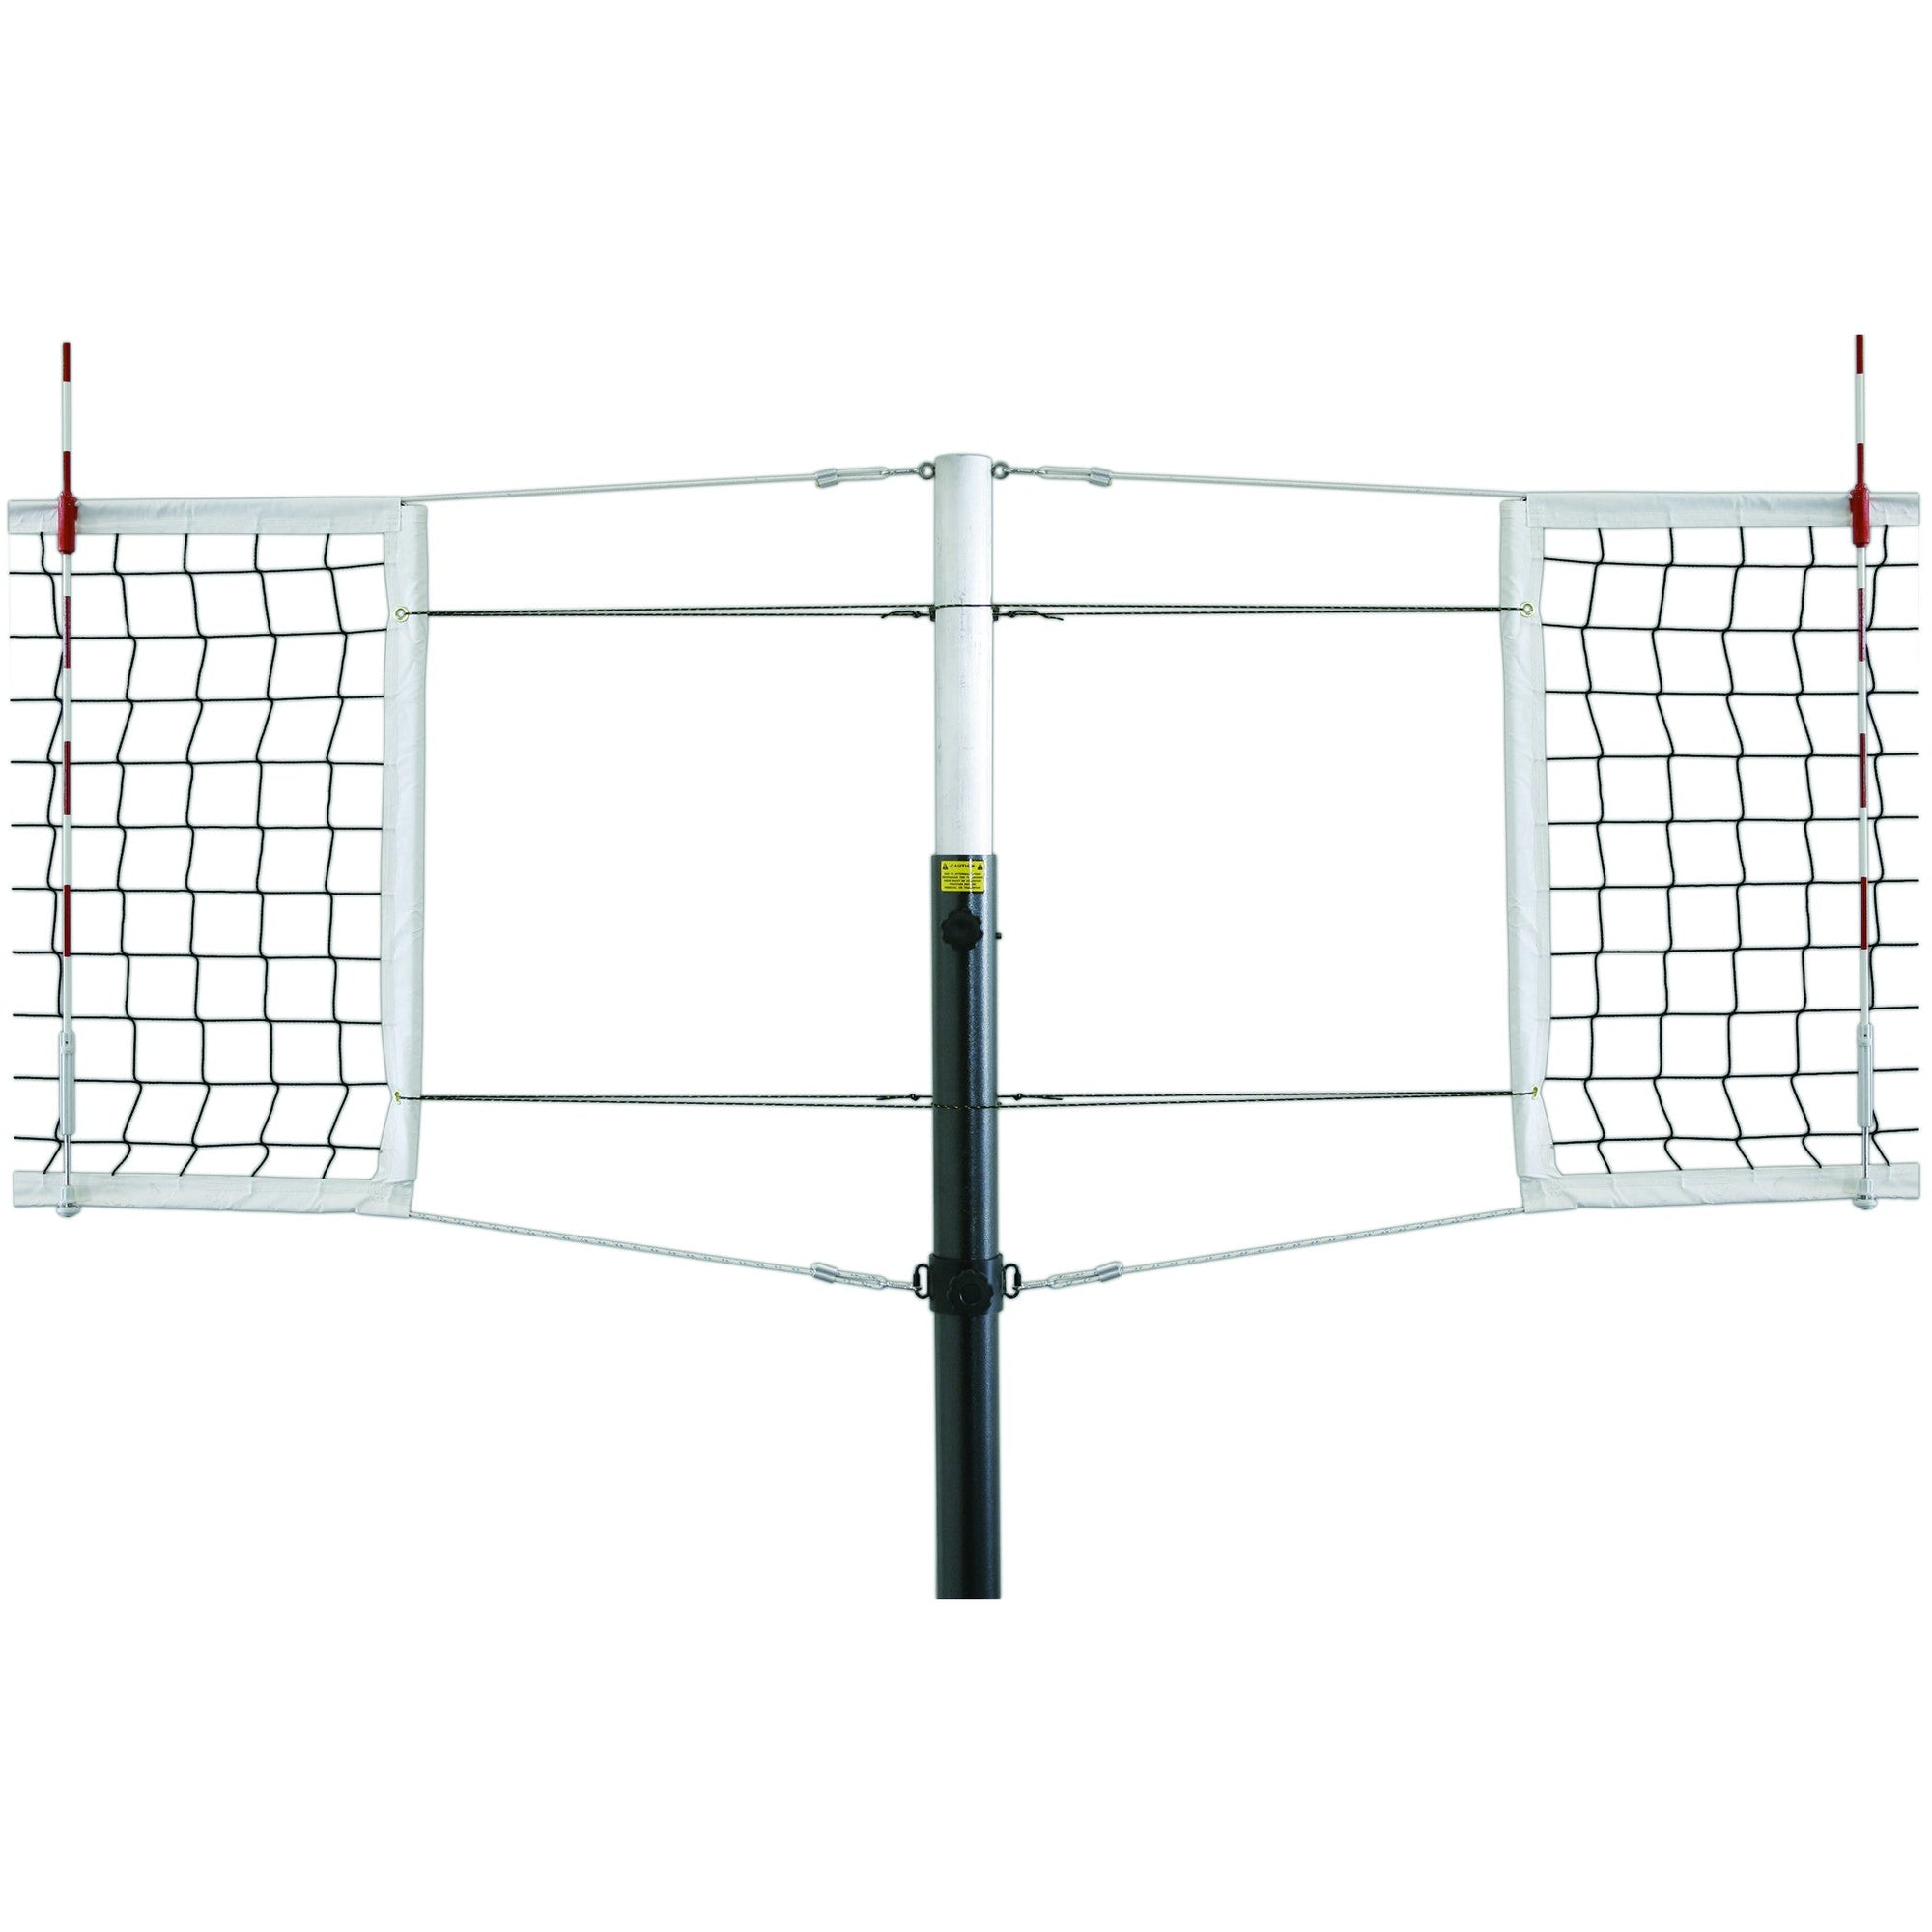 First Team Frontier 3 1/2" Steel Competition Volleyball Net System